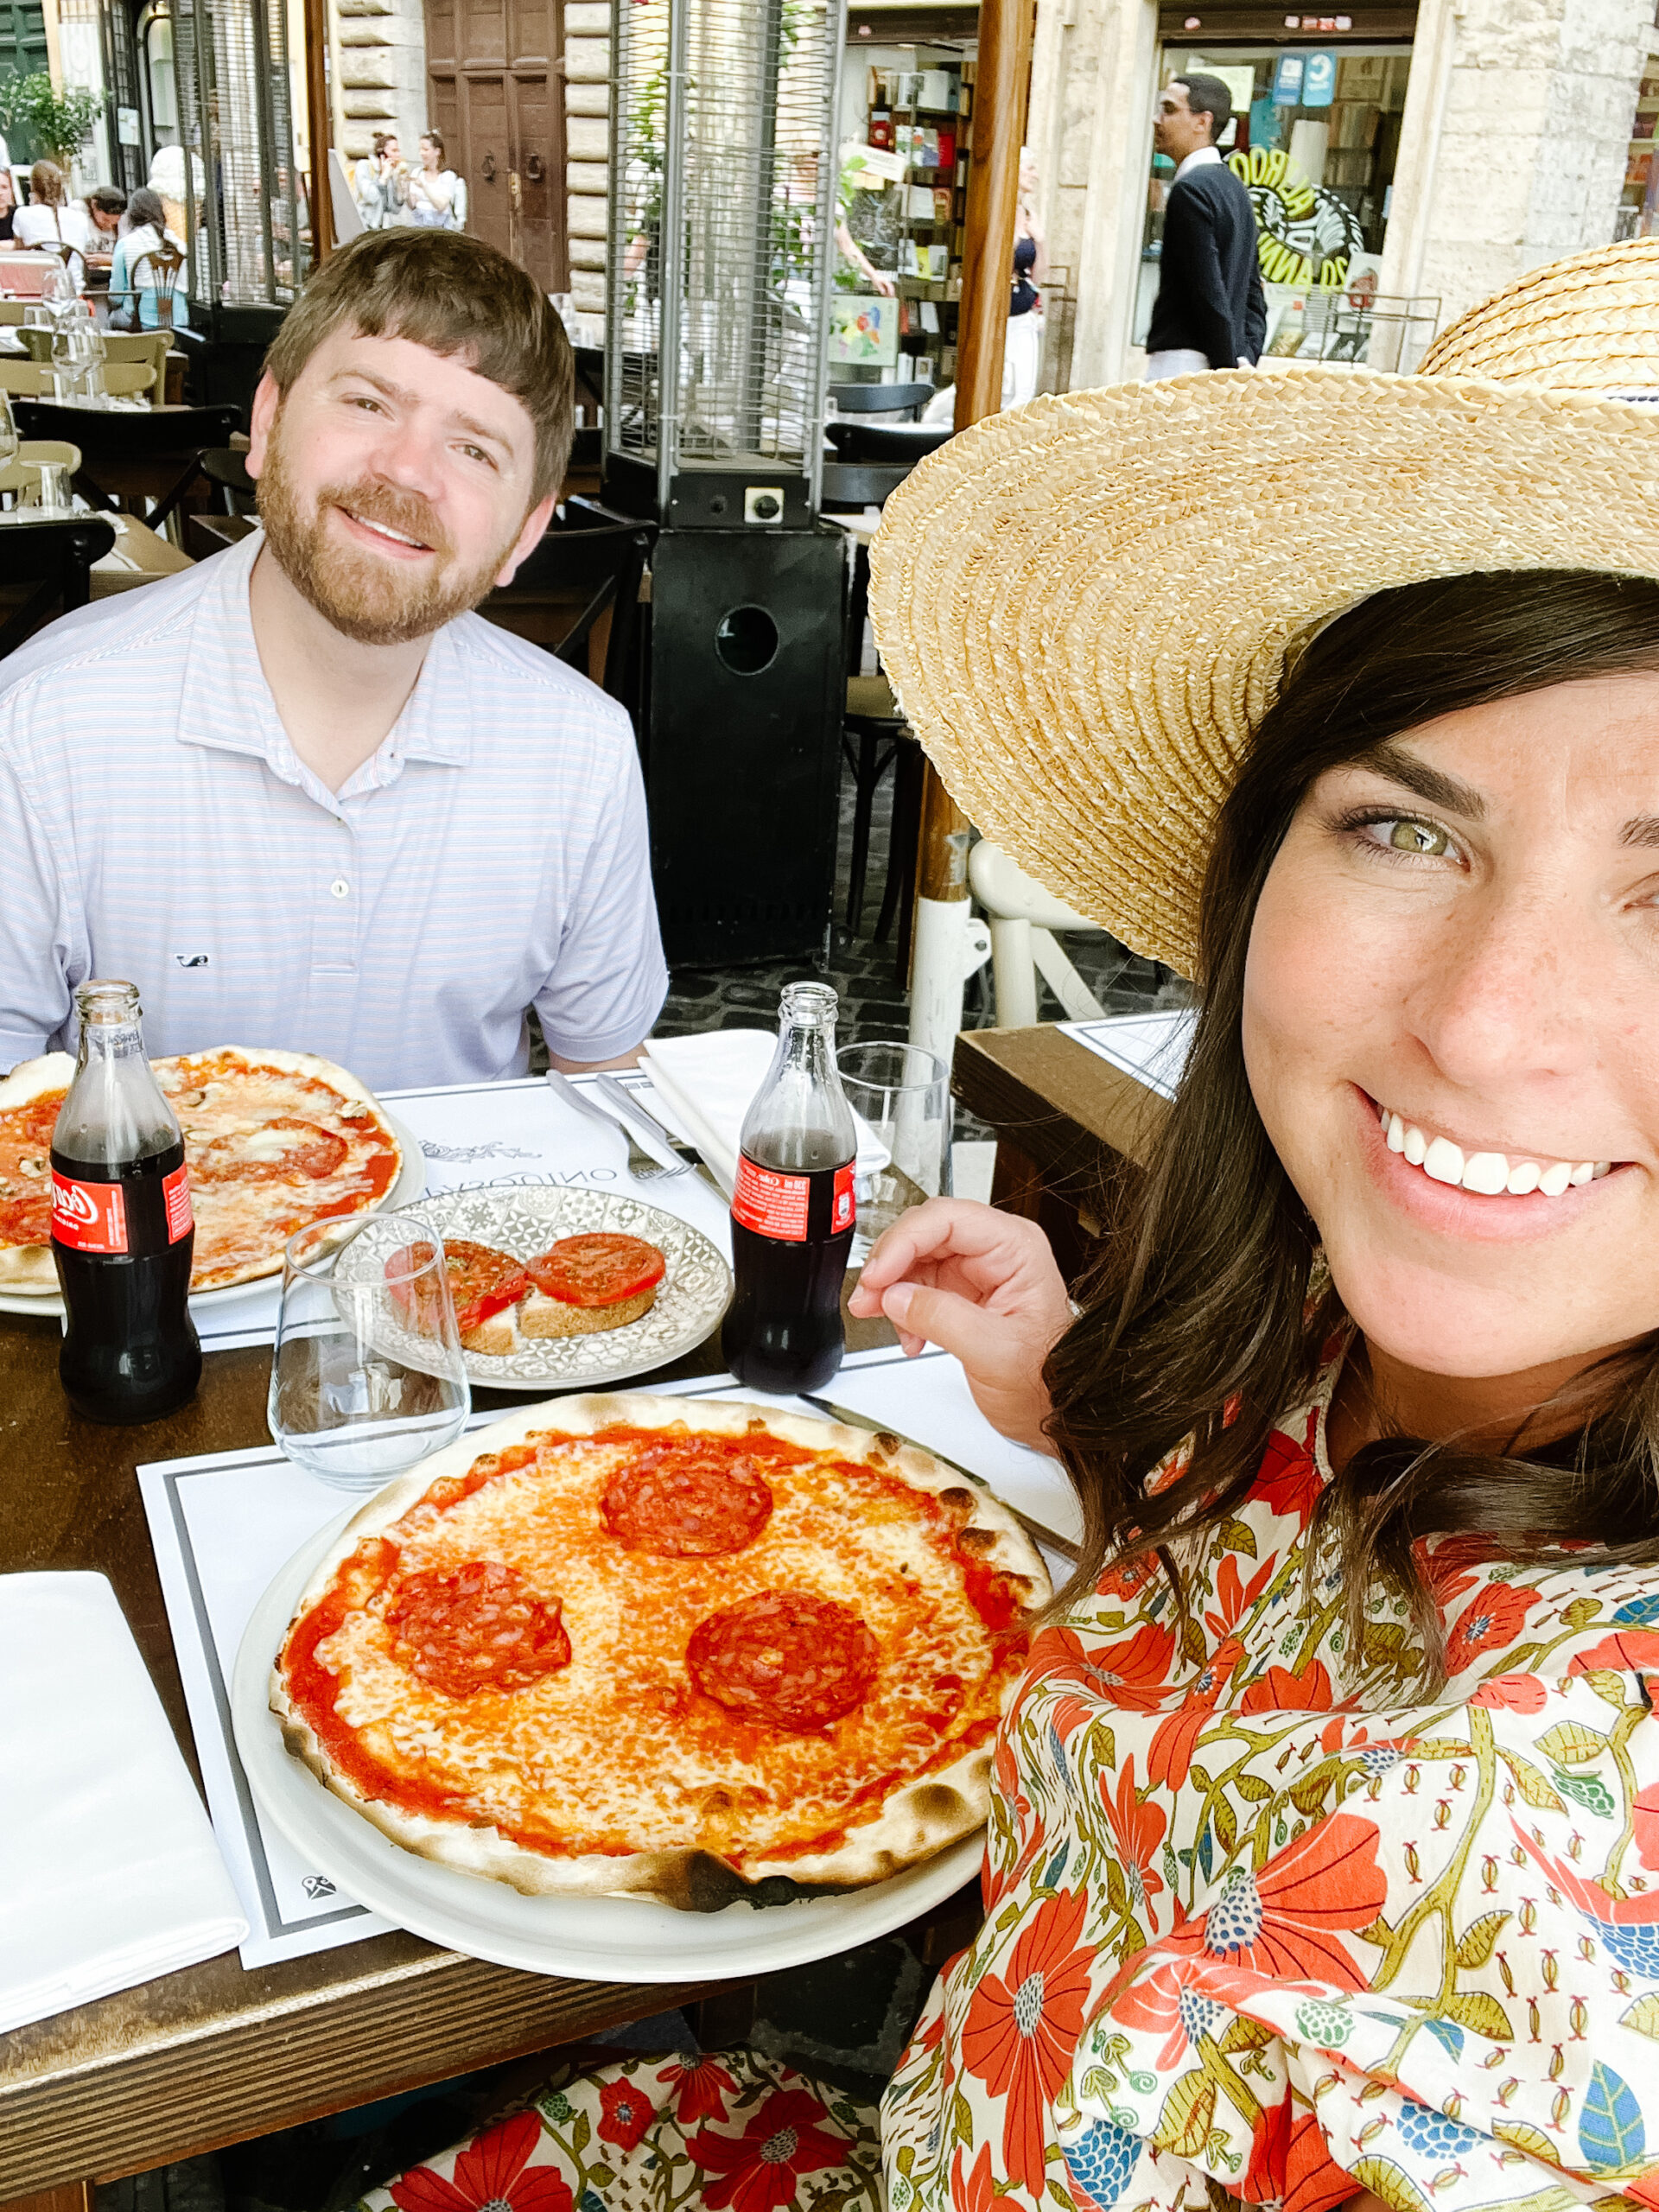 John and Brittney Naylor taking a selfie in Rome with their pizza after their pizza making class, 36 hours in Rome, 10 day Italy Itinerary